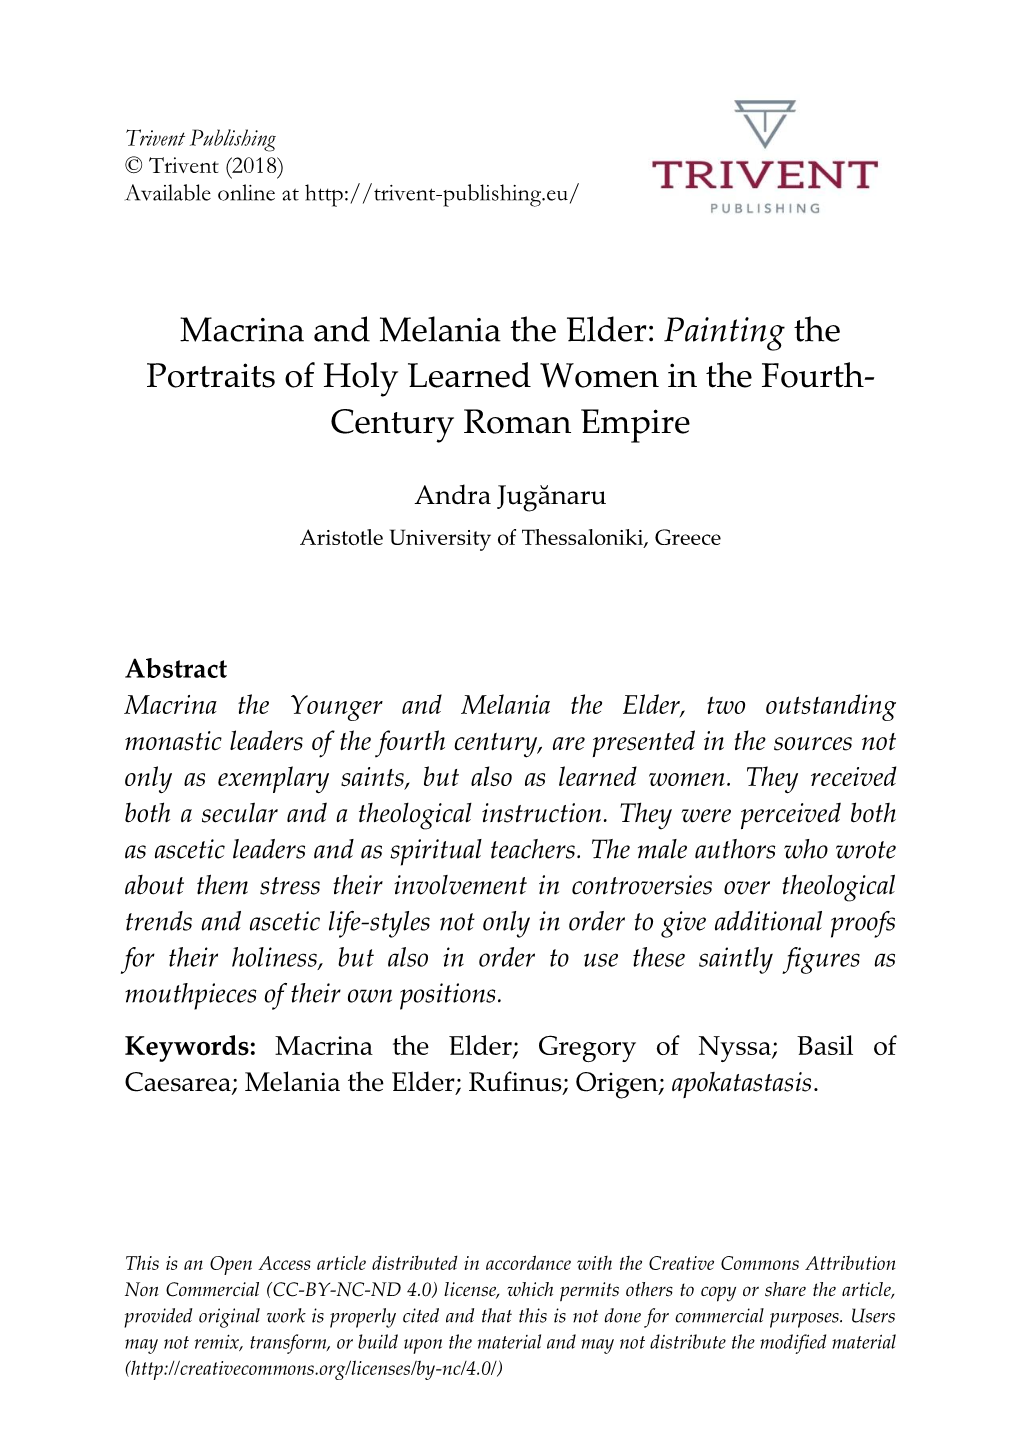 Macrina and Melania the Elder: Painting the Portraits of Holy Learned Women in the Fourth- Century Roman Empire